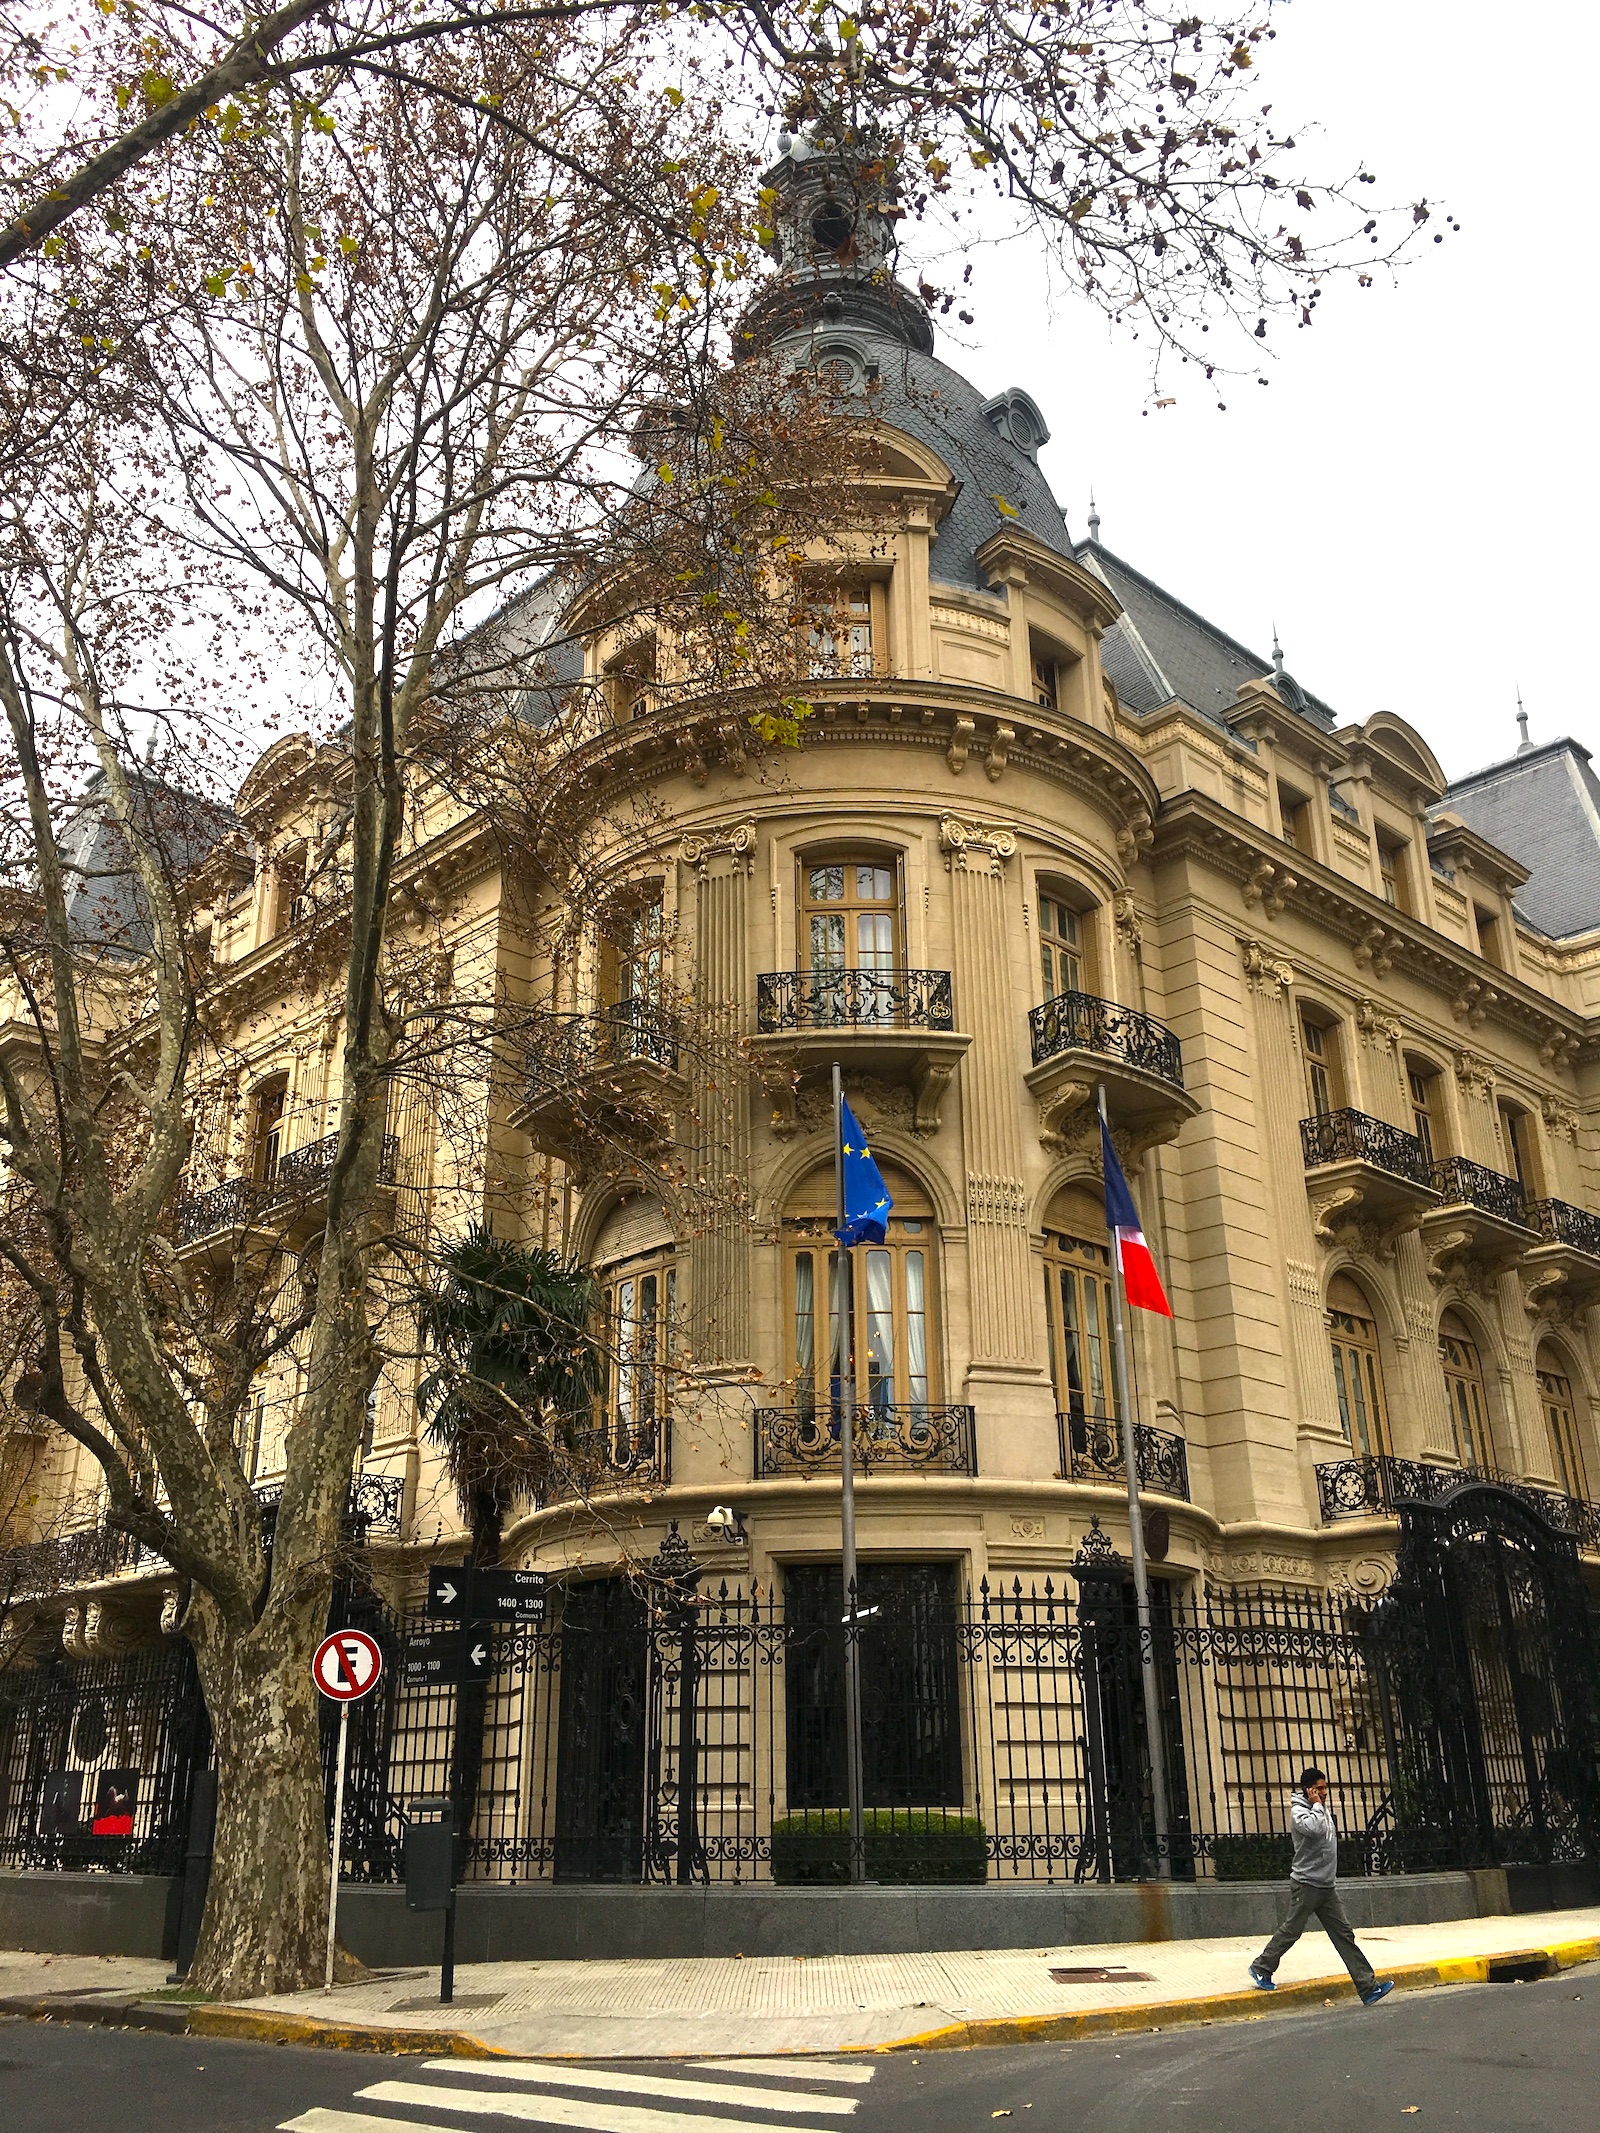 The building of the Embassy of France, Retiro